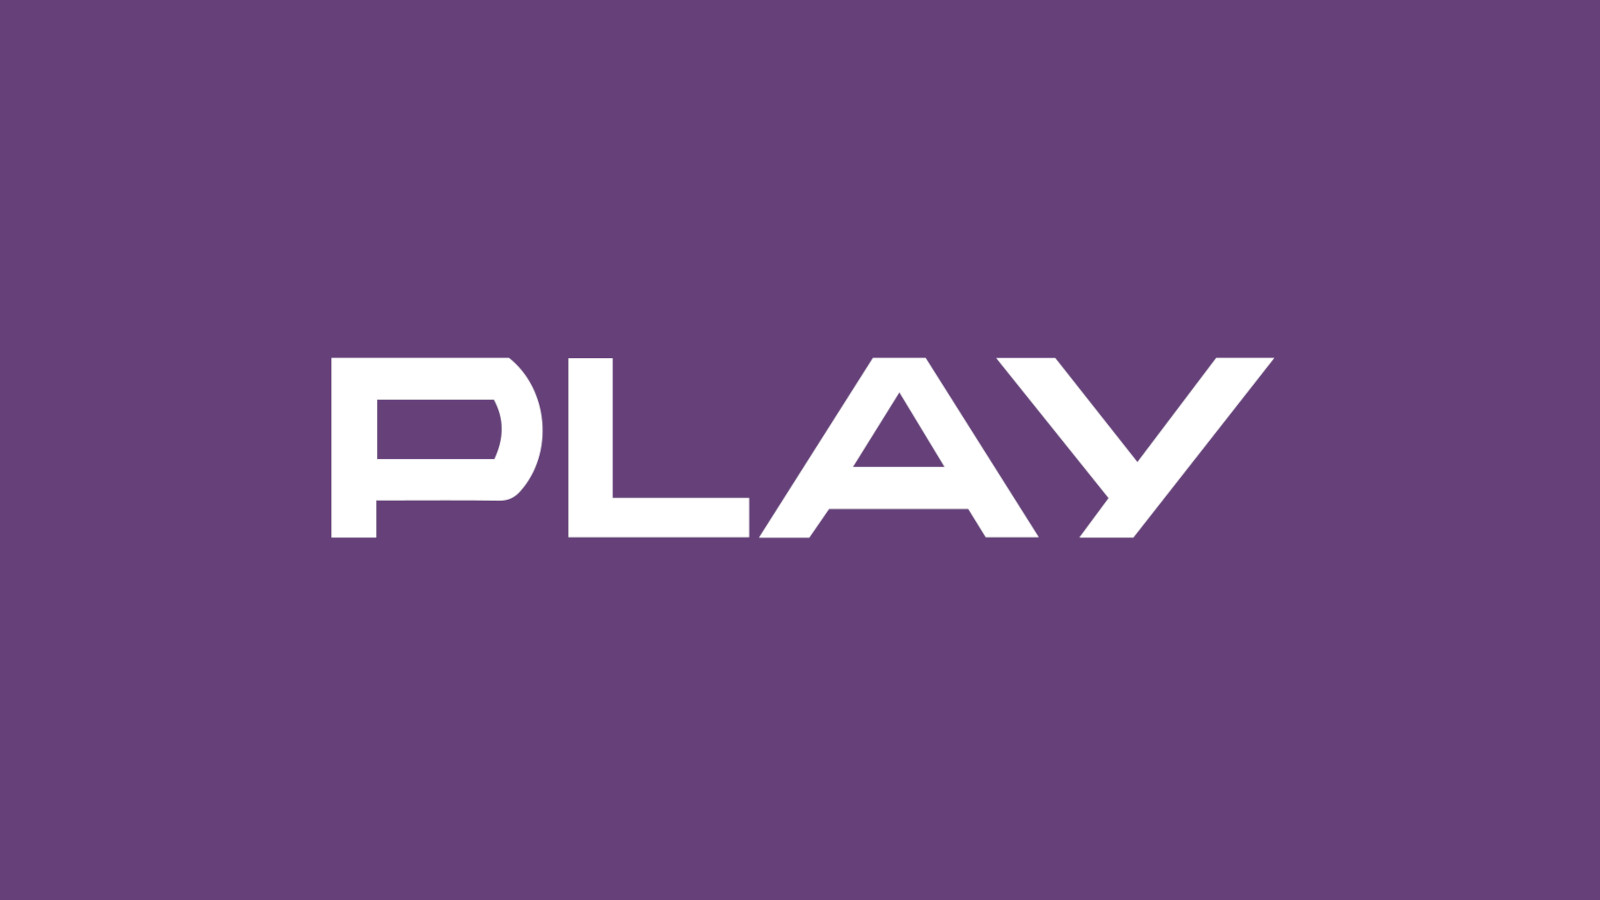 PLAY 30 PLN Mobile Top-up PL 7.93 USD